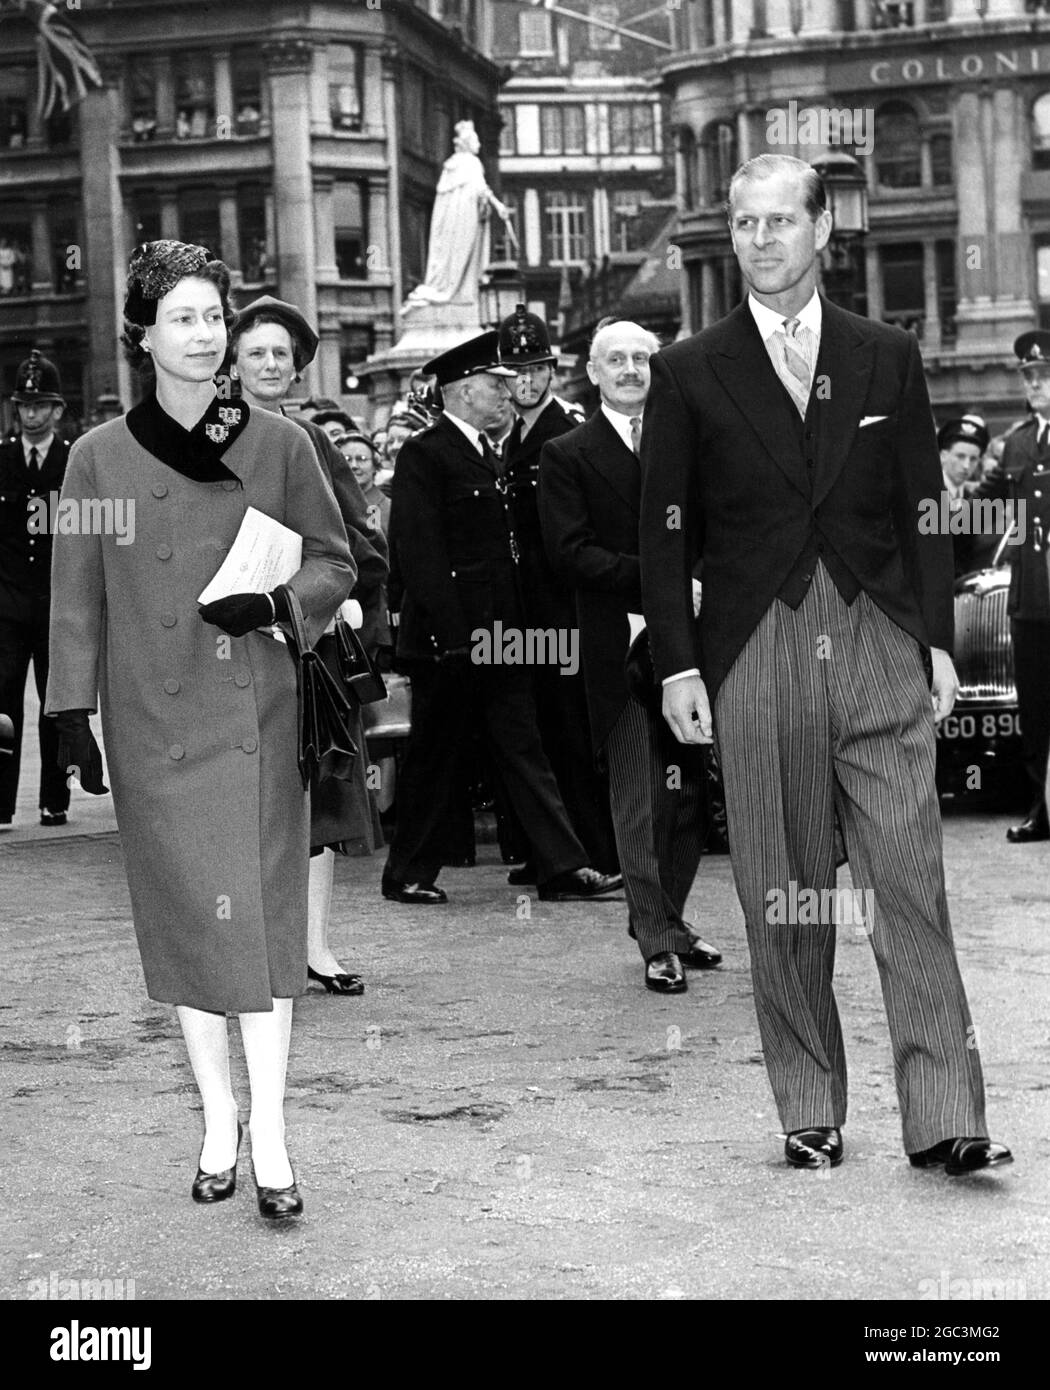 H M the Queen and the Duke of Edinburgh attend St Paul's Cathedral for the dedication of the new high altar , which is a memorial for the men and women of the commonwealth who lost their lives in the two world wars . The Queen and the Duke of Edinburgh , walk in procession to the Chapter House of St Paul's after the dedication ceremony . 7th May 1958 Stock Photo